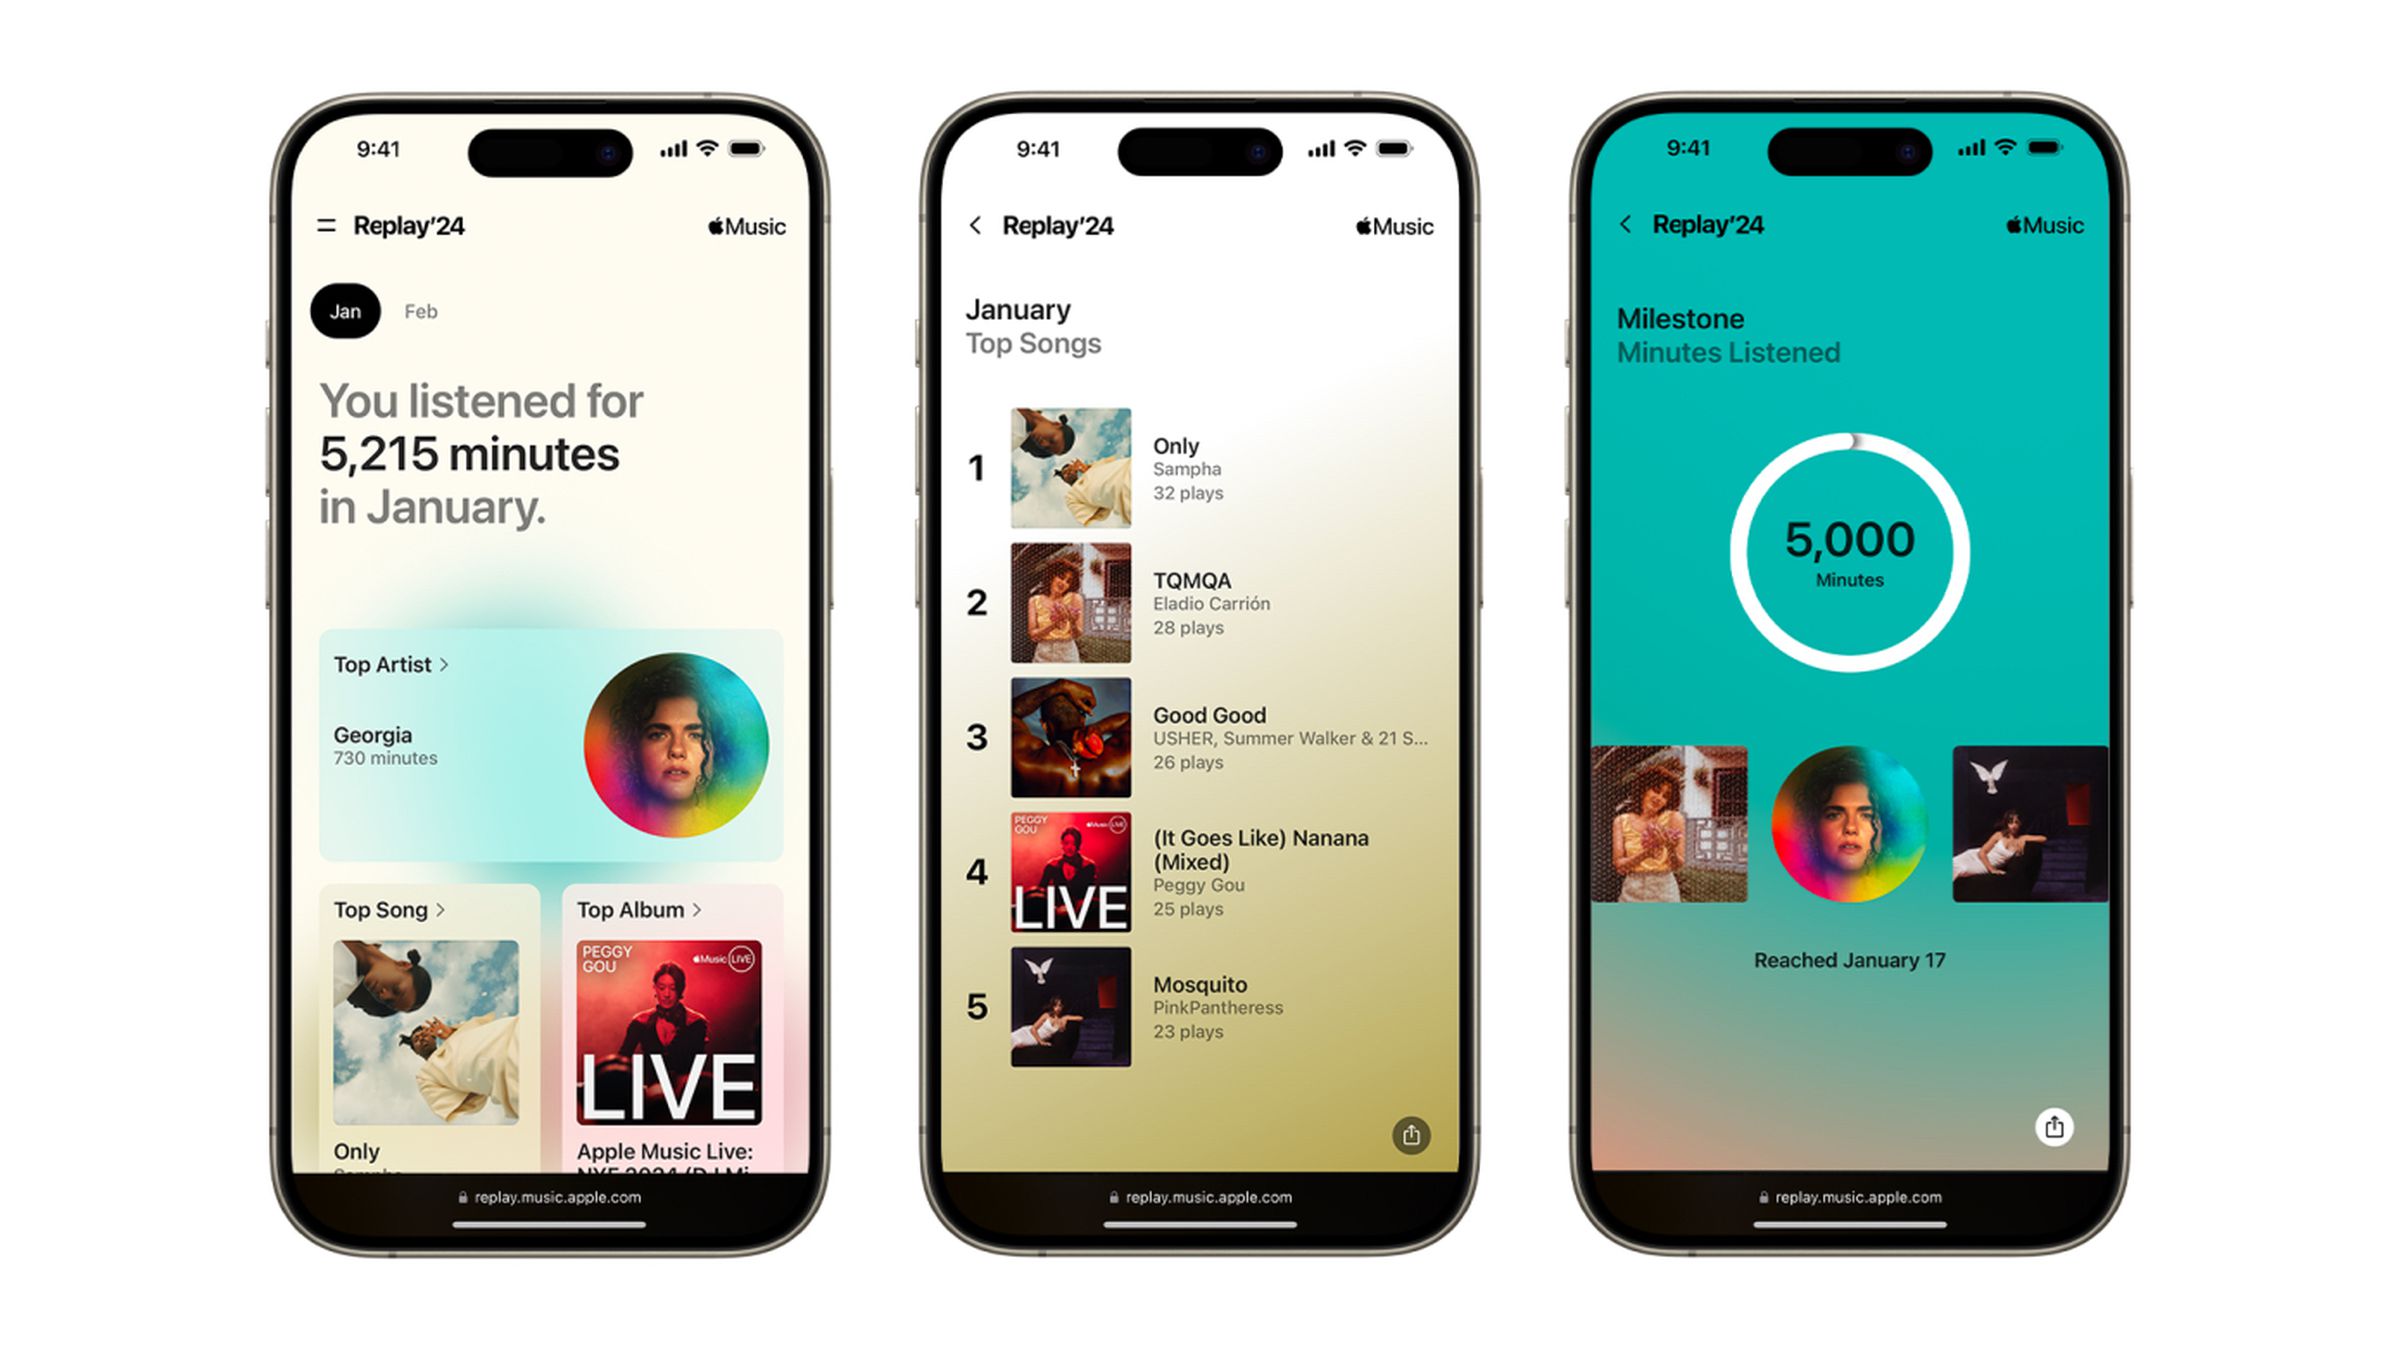 Three simulated screenshots showing the monthly Apple Music Replay recap screens on iPhones with total minutes listened, top songs, and milestone achievements.